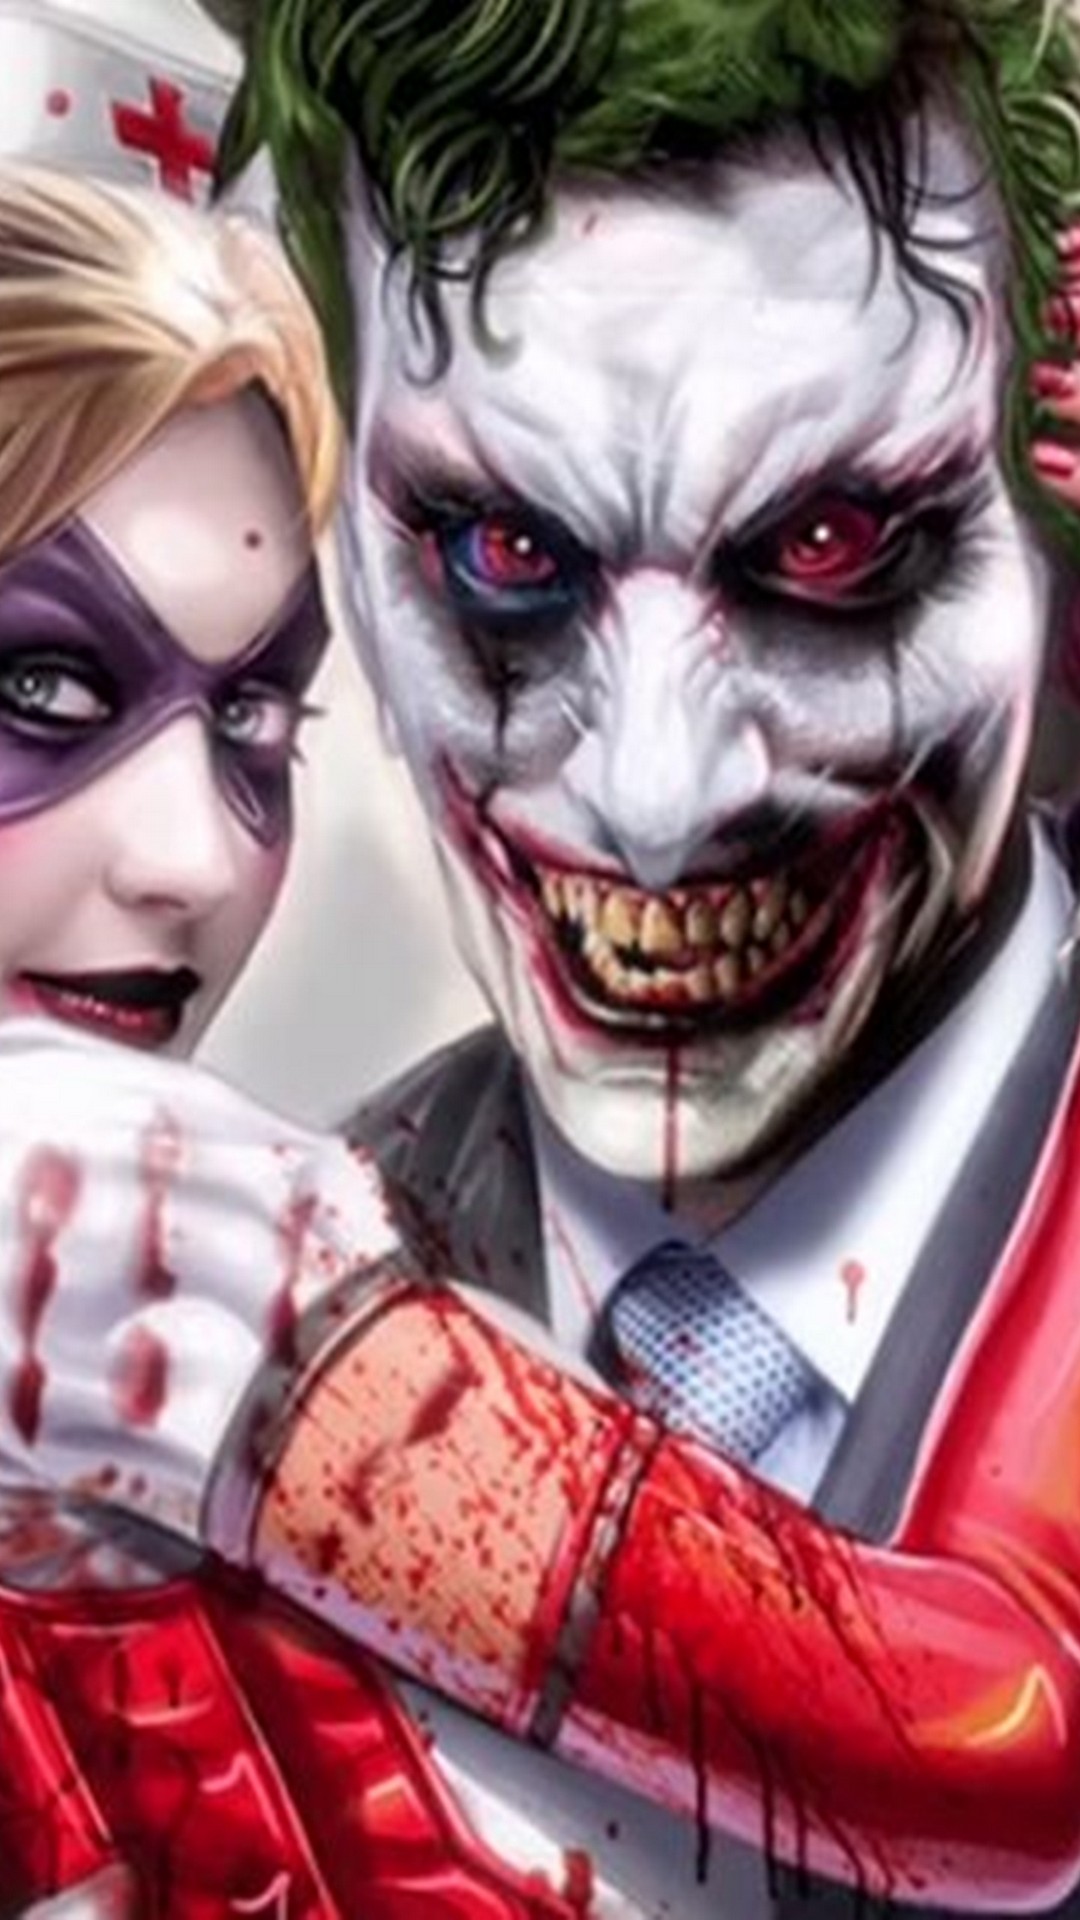 Free Download Wallpaper Joker And Harley Android 19 Android Wallpapers 1080x19 For Your Desktop Mobile Tablet Explore 51 Joker And Harley Phone Wallpapers Joker And Harley Phone Wallpapers Joker